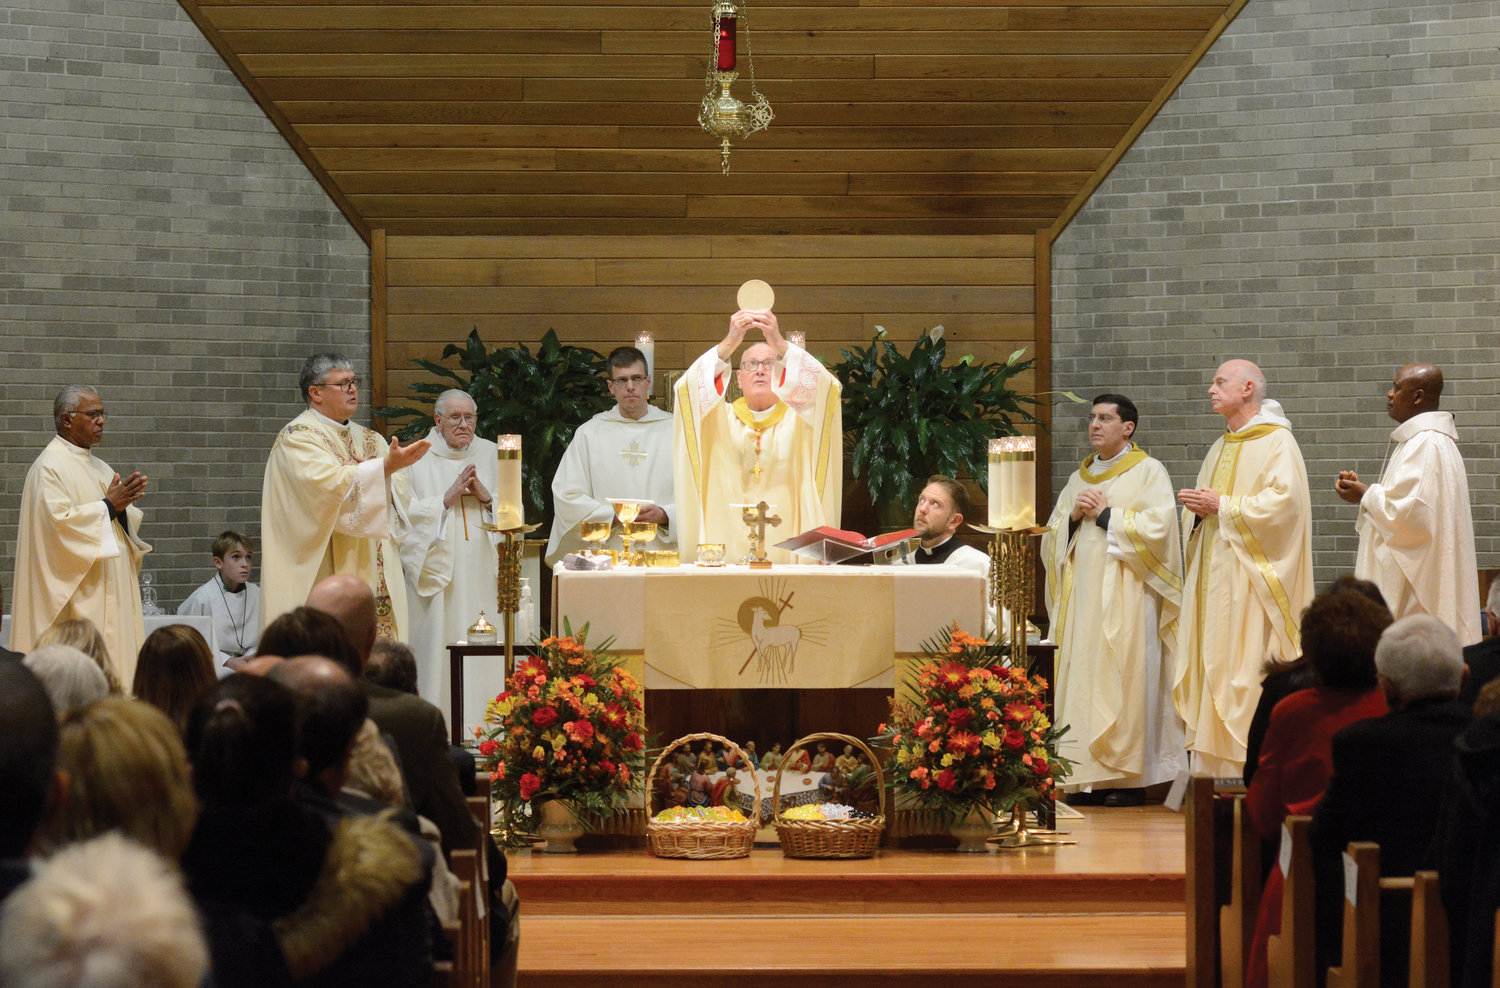 LORD’S TABLE—Cardinal Dolan elevates the Eucharist during the consecration at a Mass last Nov. 20 celebrating the 125th anniversary of Holy Name of Jesus parish in Valhalla.